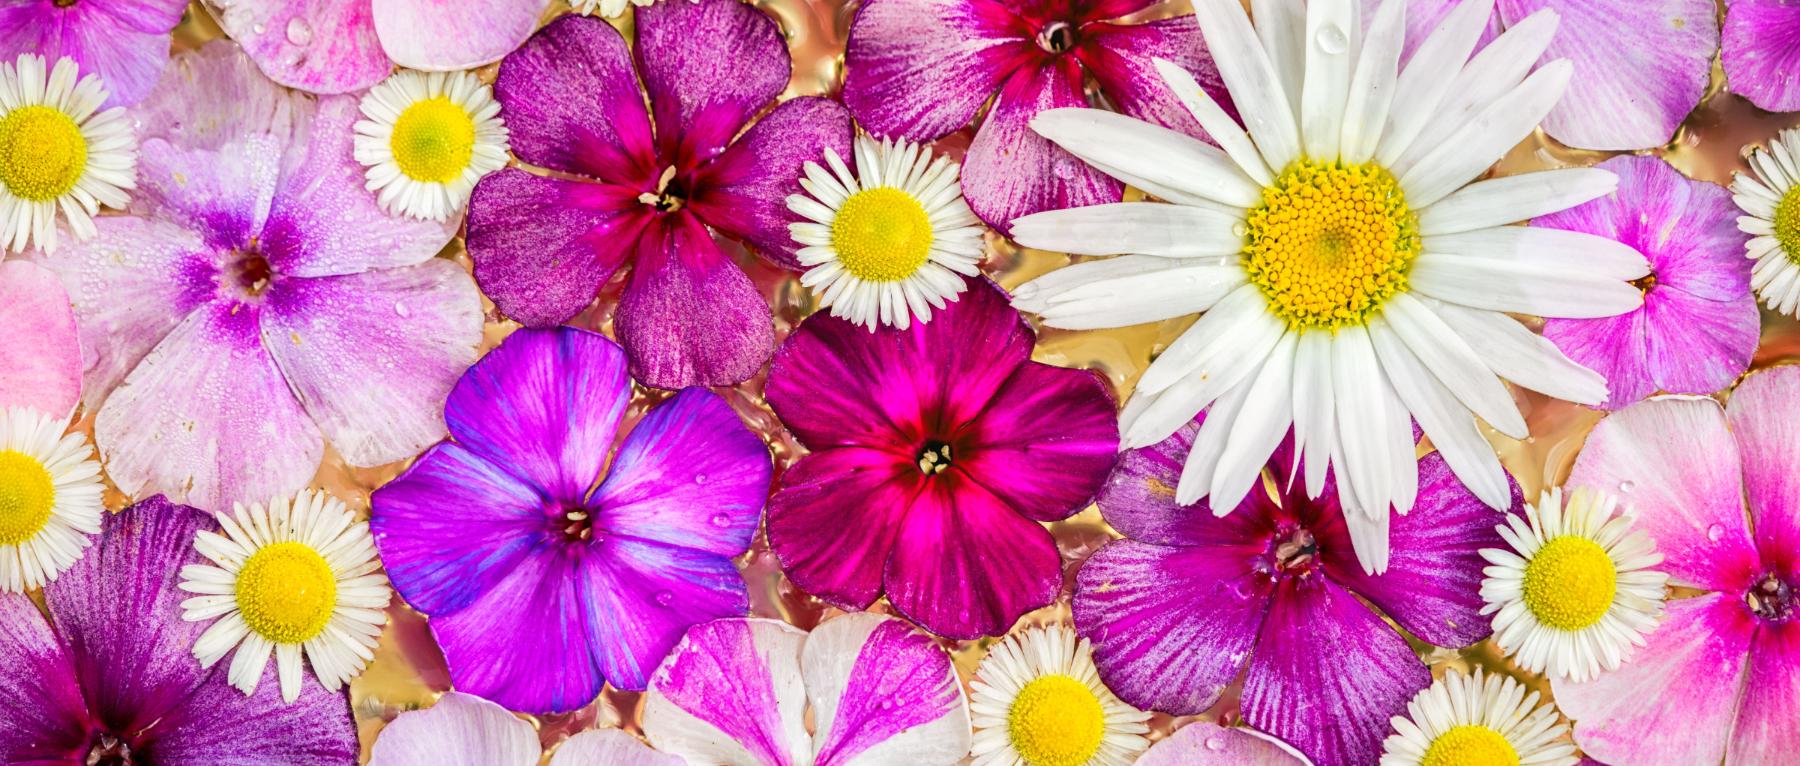 top view phlox and chamomile flowers as a colorful background (c) elen31 | stock.adobe.com